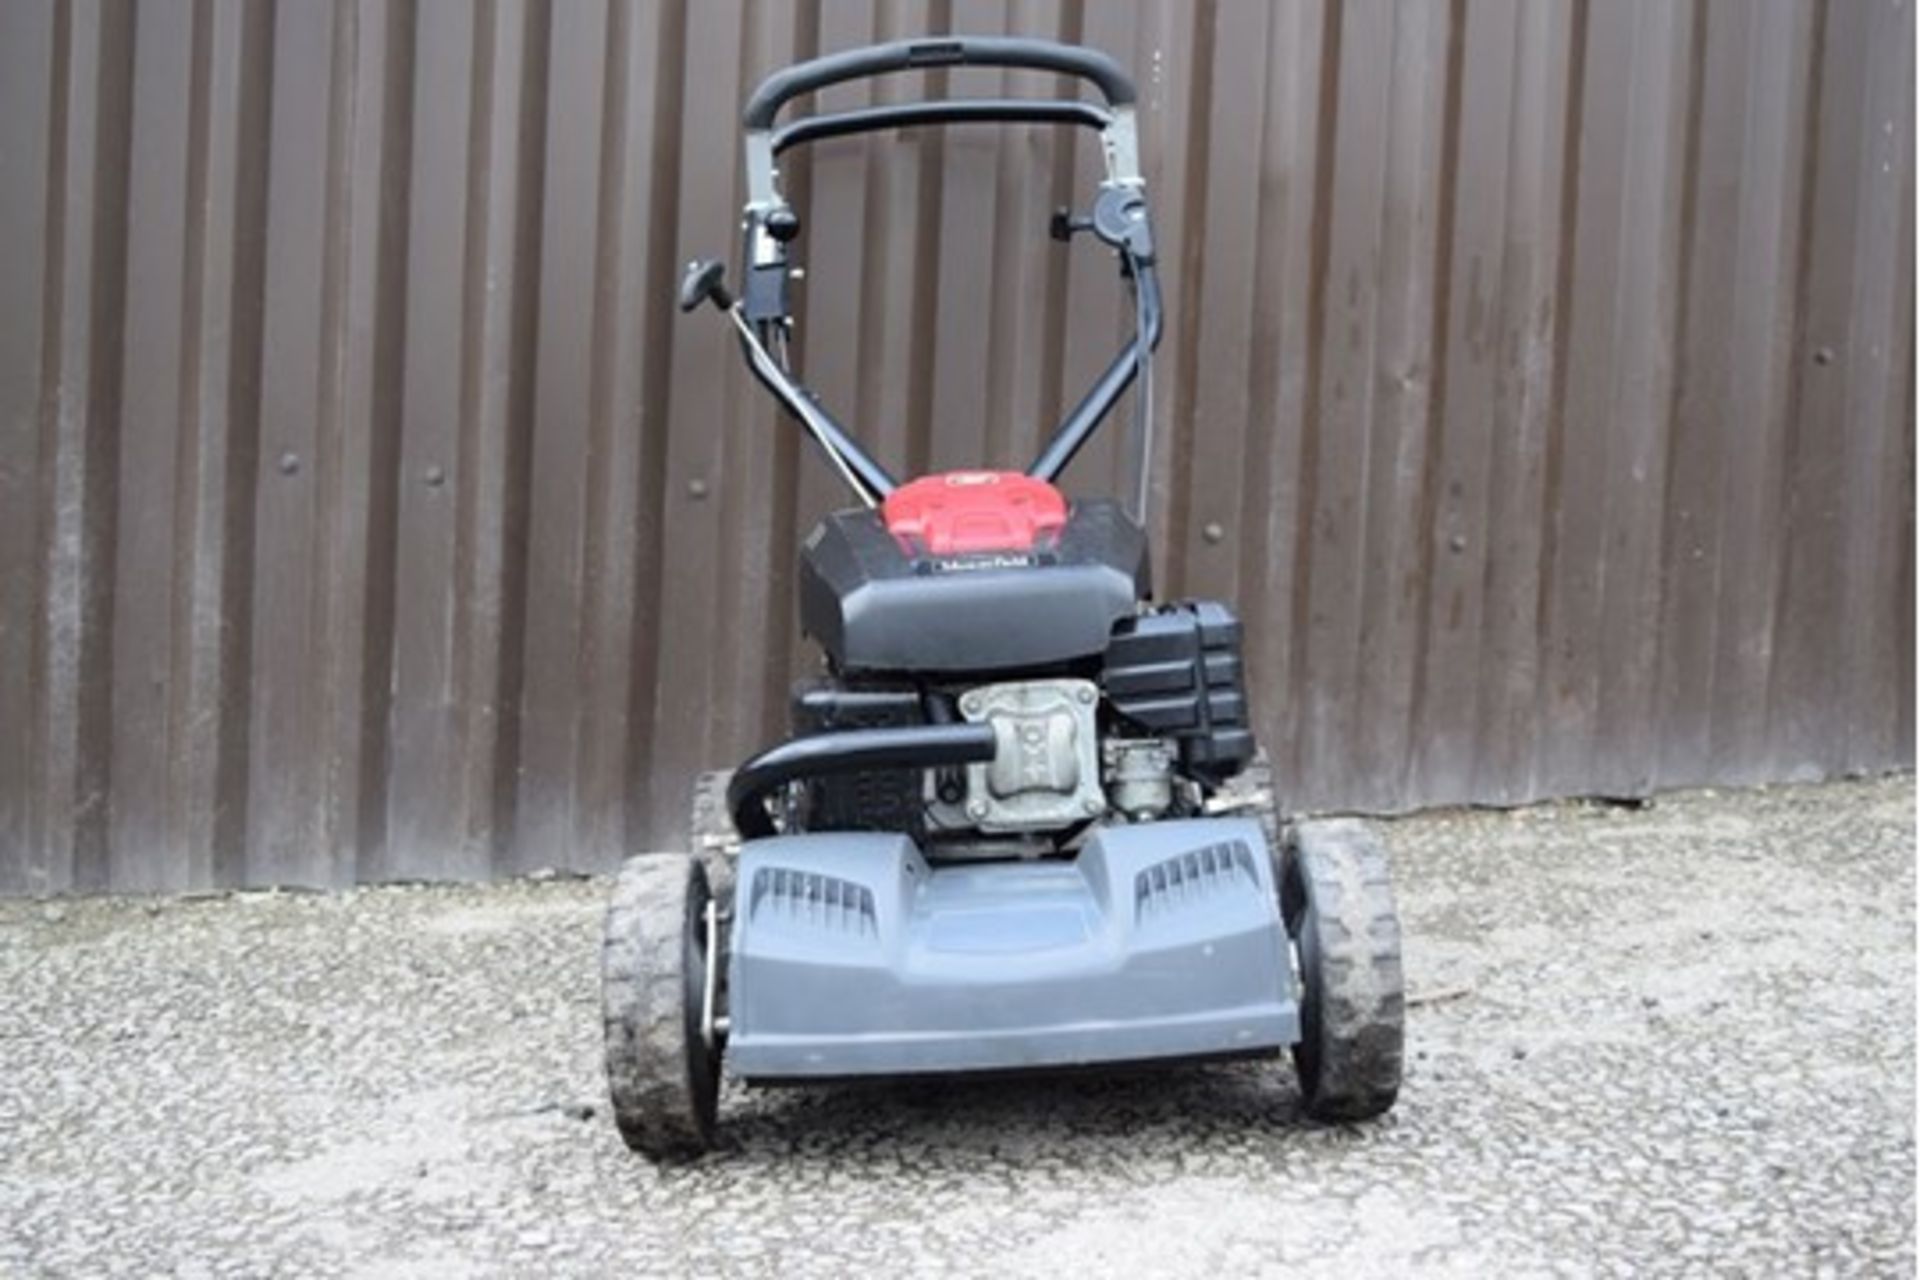 2009 Mountfield Multiclip 501 SP 48cm Self-Propelled Rotary Mower - Image 2 of 6